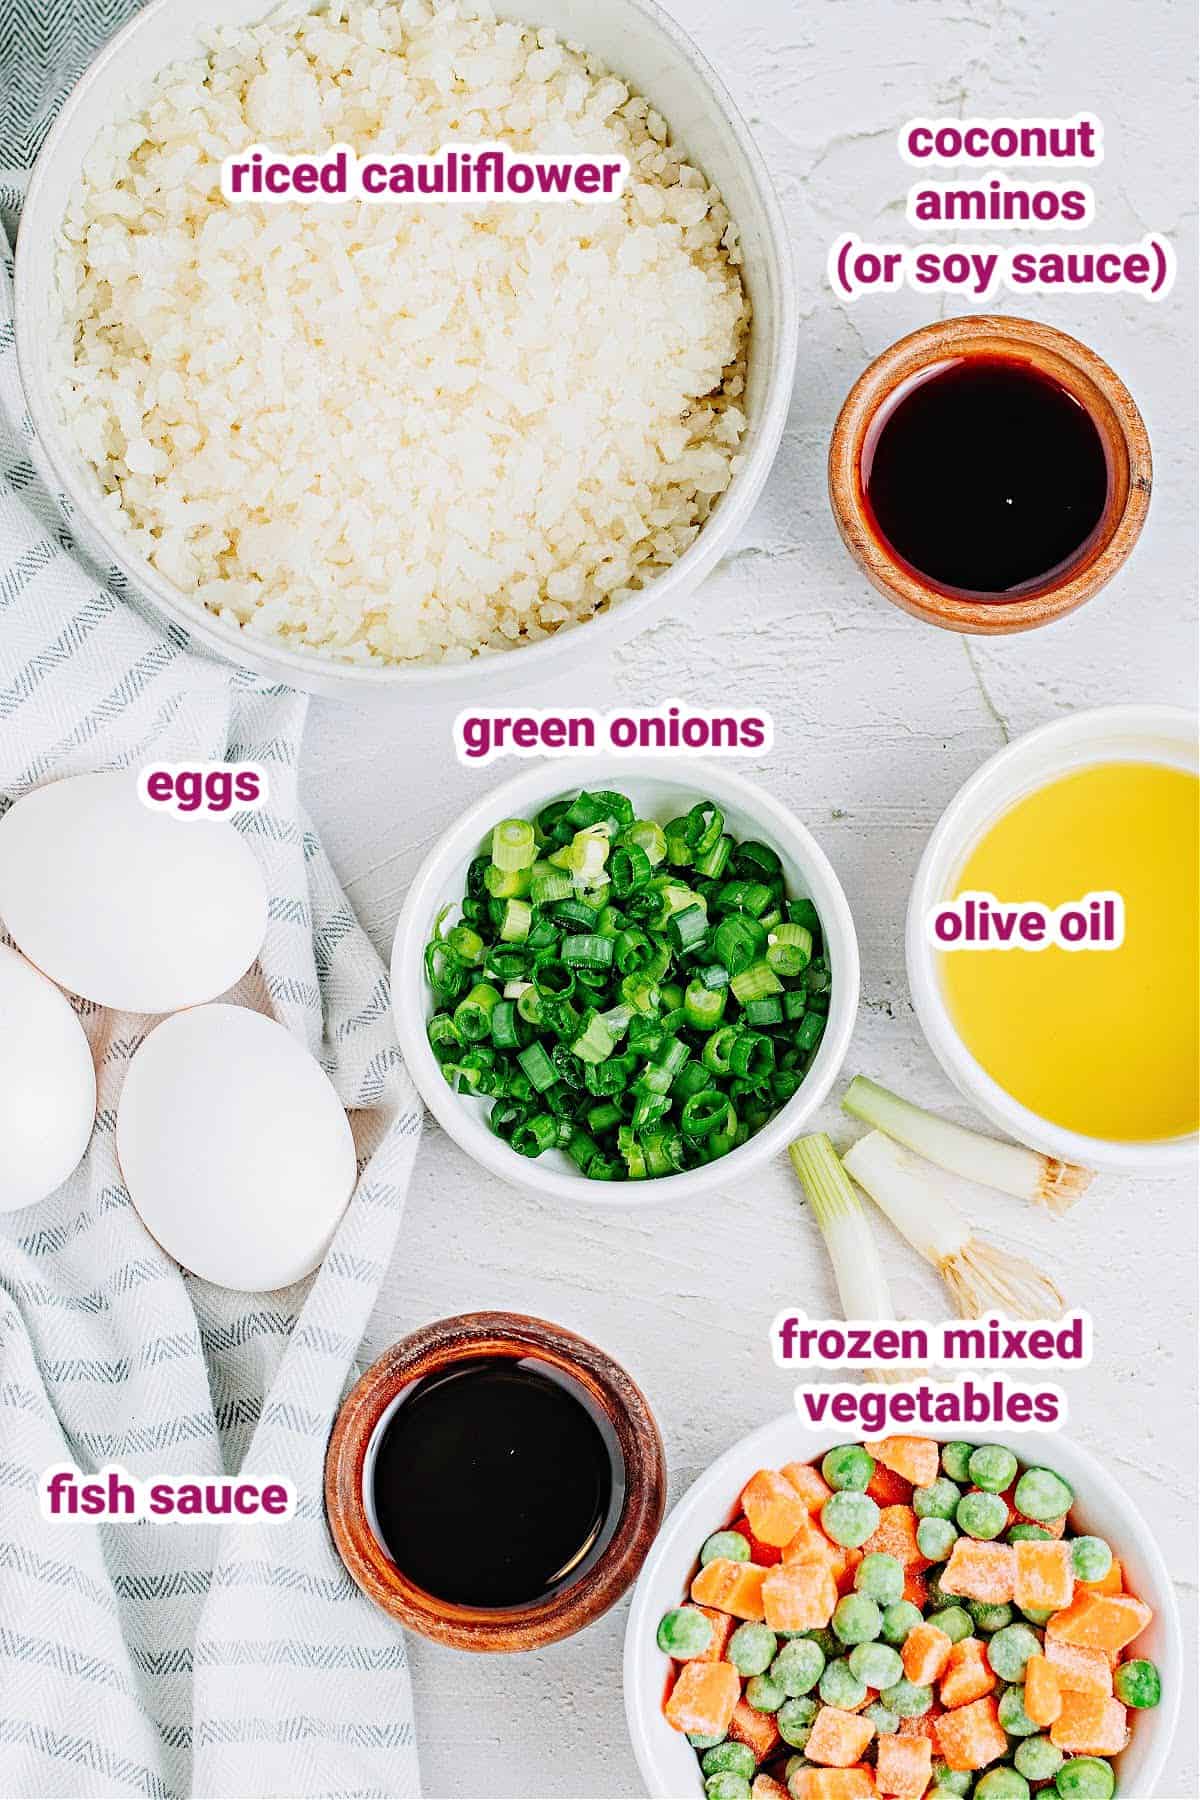 ingredients needed to make vegetable cauliflower fried rice with like cauliflower rice, green onions, eggs, coconut aminos, olive oil, frozen mixed vegetables, and fish sauce. 